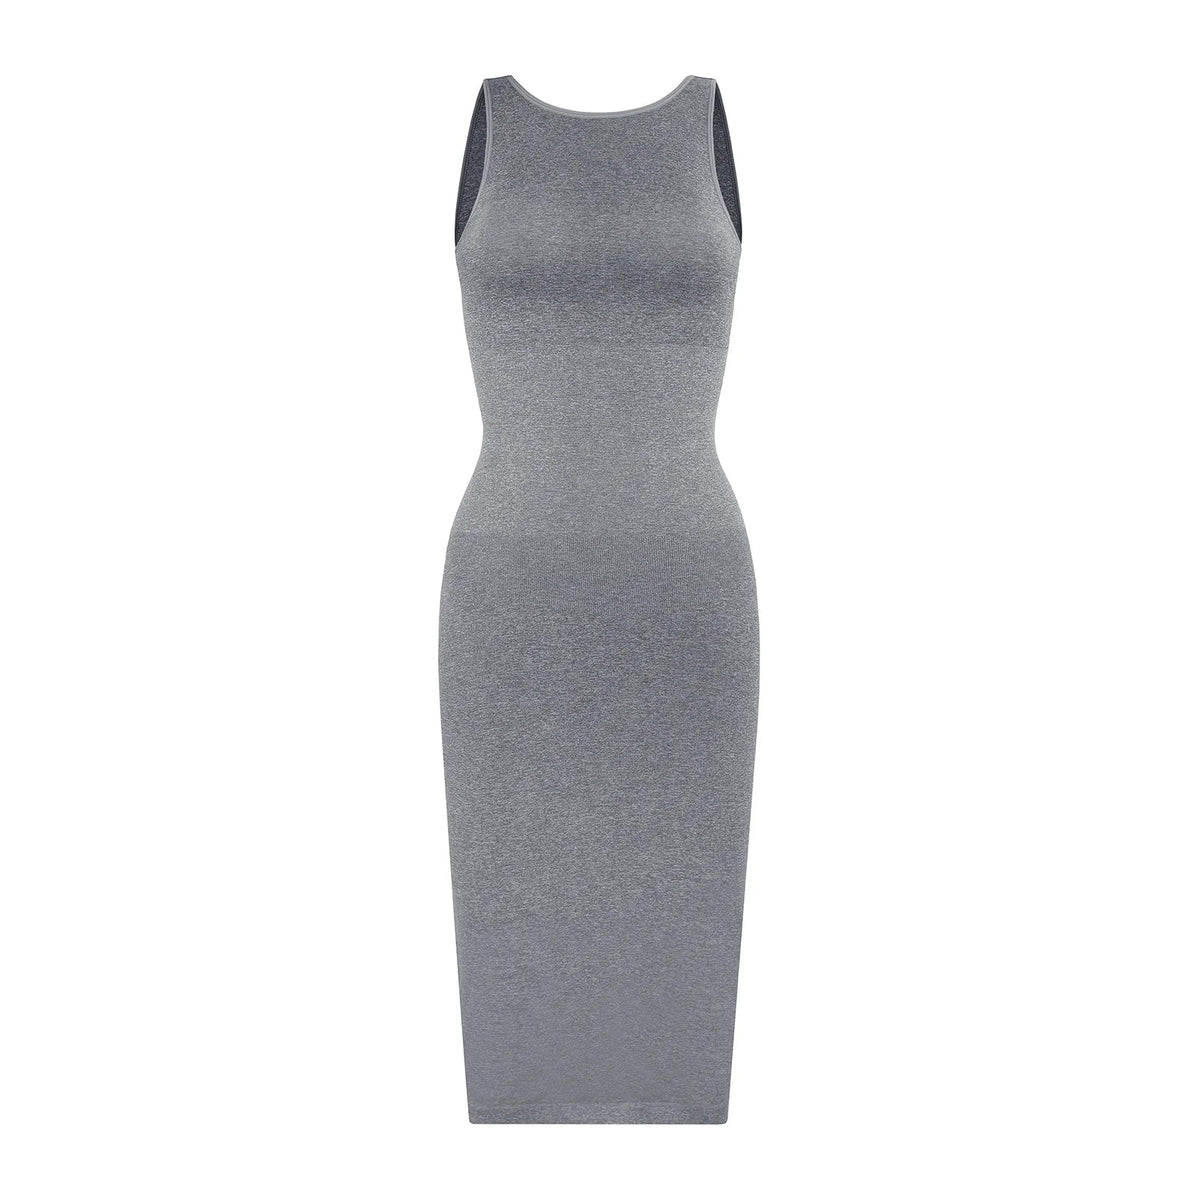 Dusk Hues Built In Shapewear Cotton Bodycon Dress | Hypoallergenic - Allergy Friendly - Naturally Free